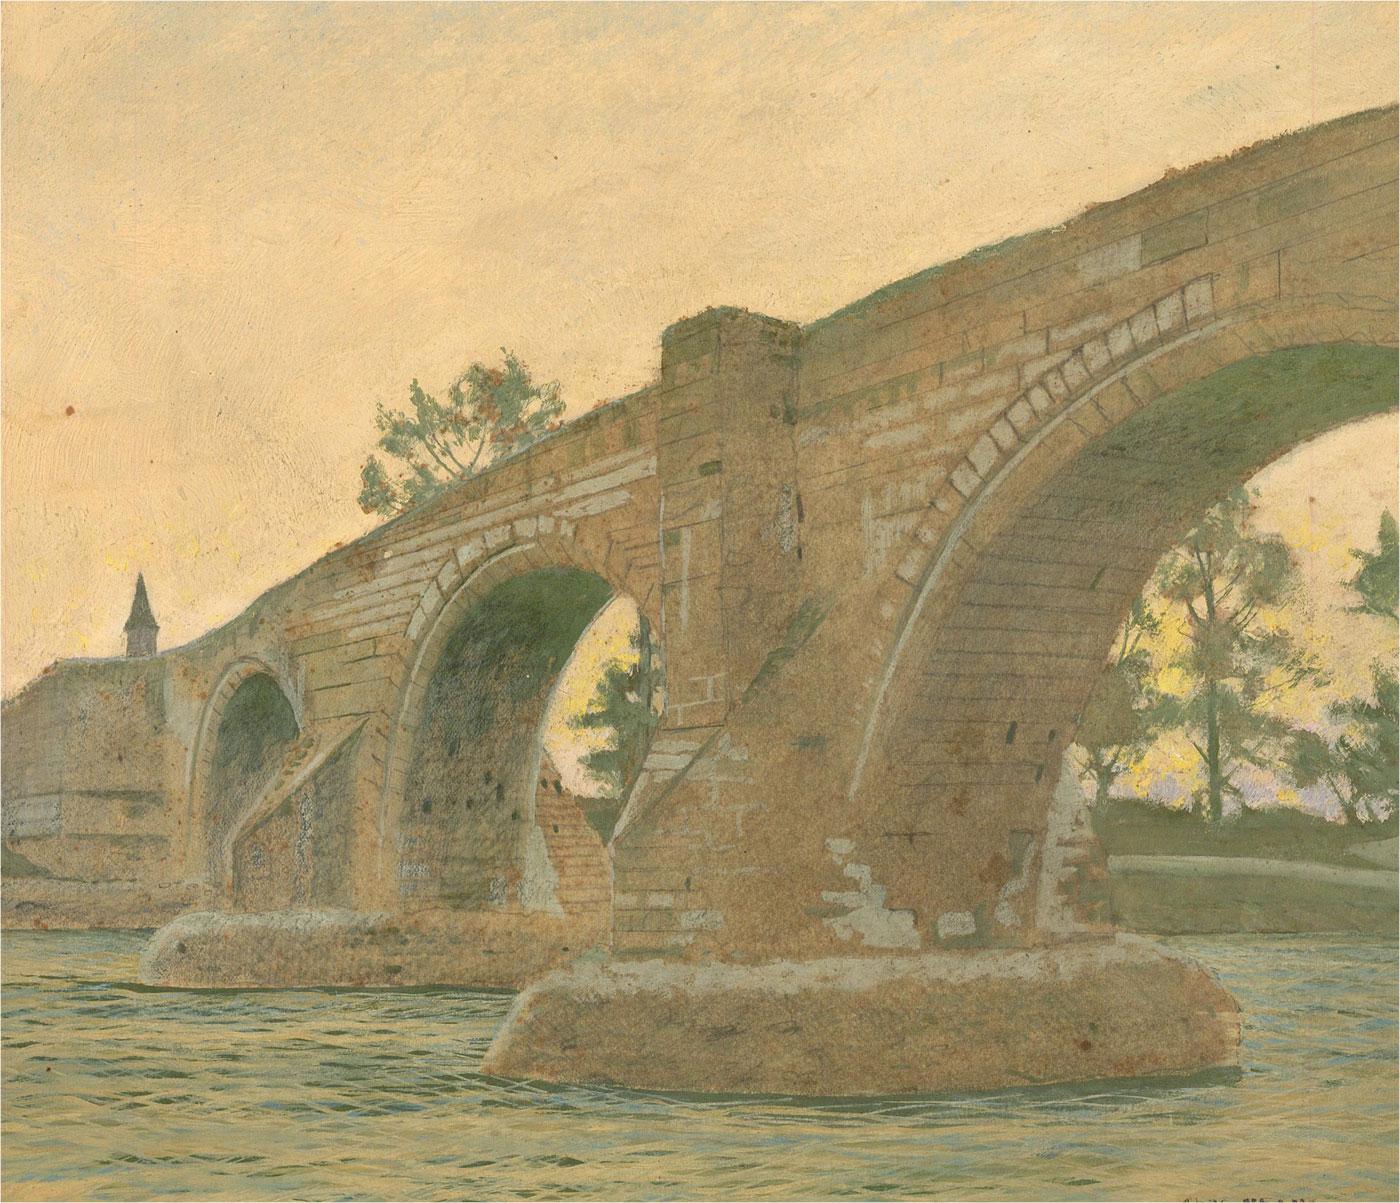 An oil and watercolour painting of Stirling Bridge in Scotland by the renowned marine and war artist Charles Pears. Signed to the lower-right edge. Inscribed with the location to the reverse. On wove laid to board.